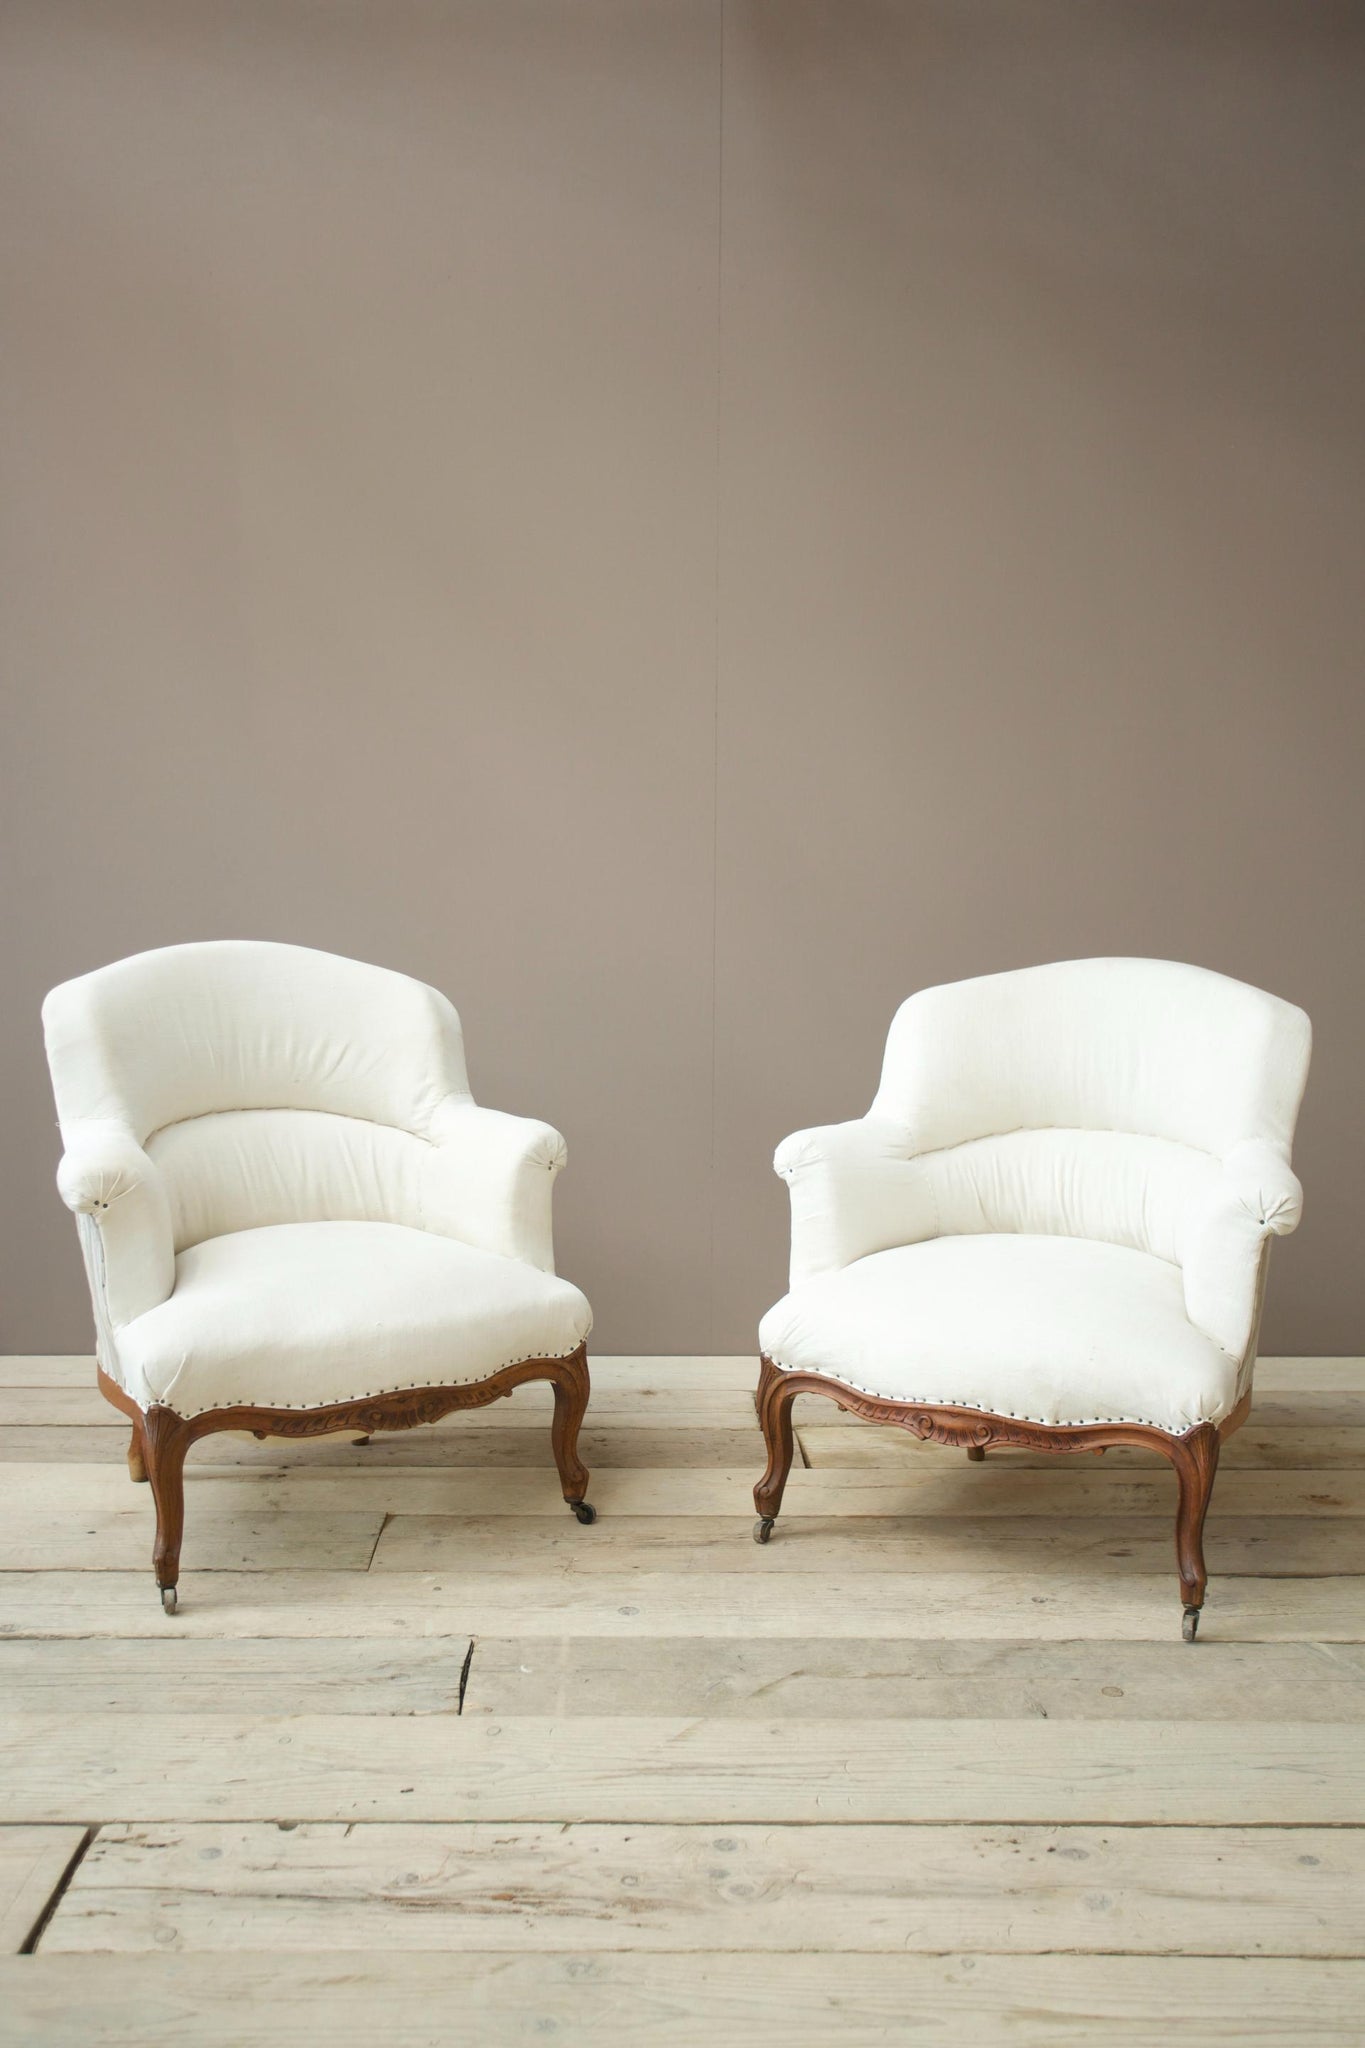 Pair of 19th century French shield back armchairs with carved frame